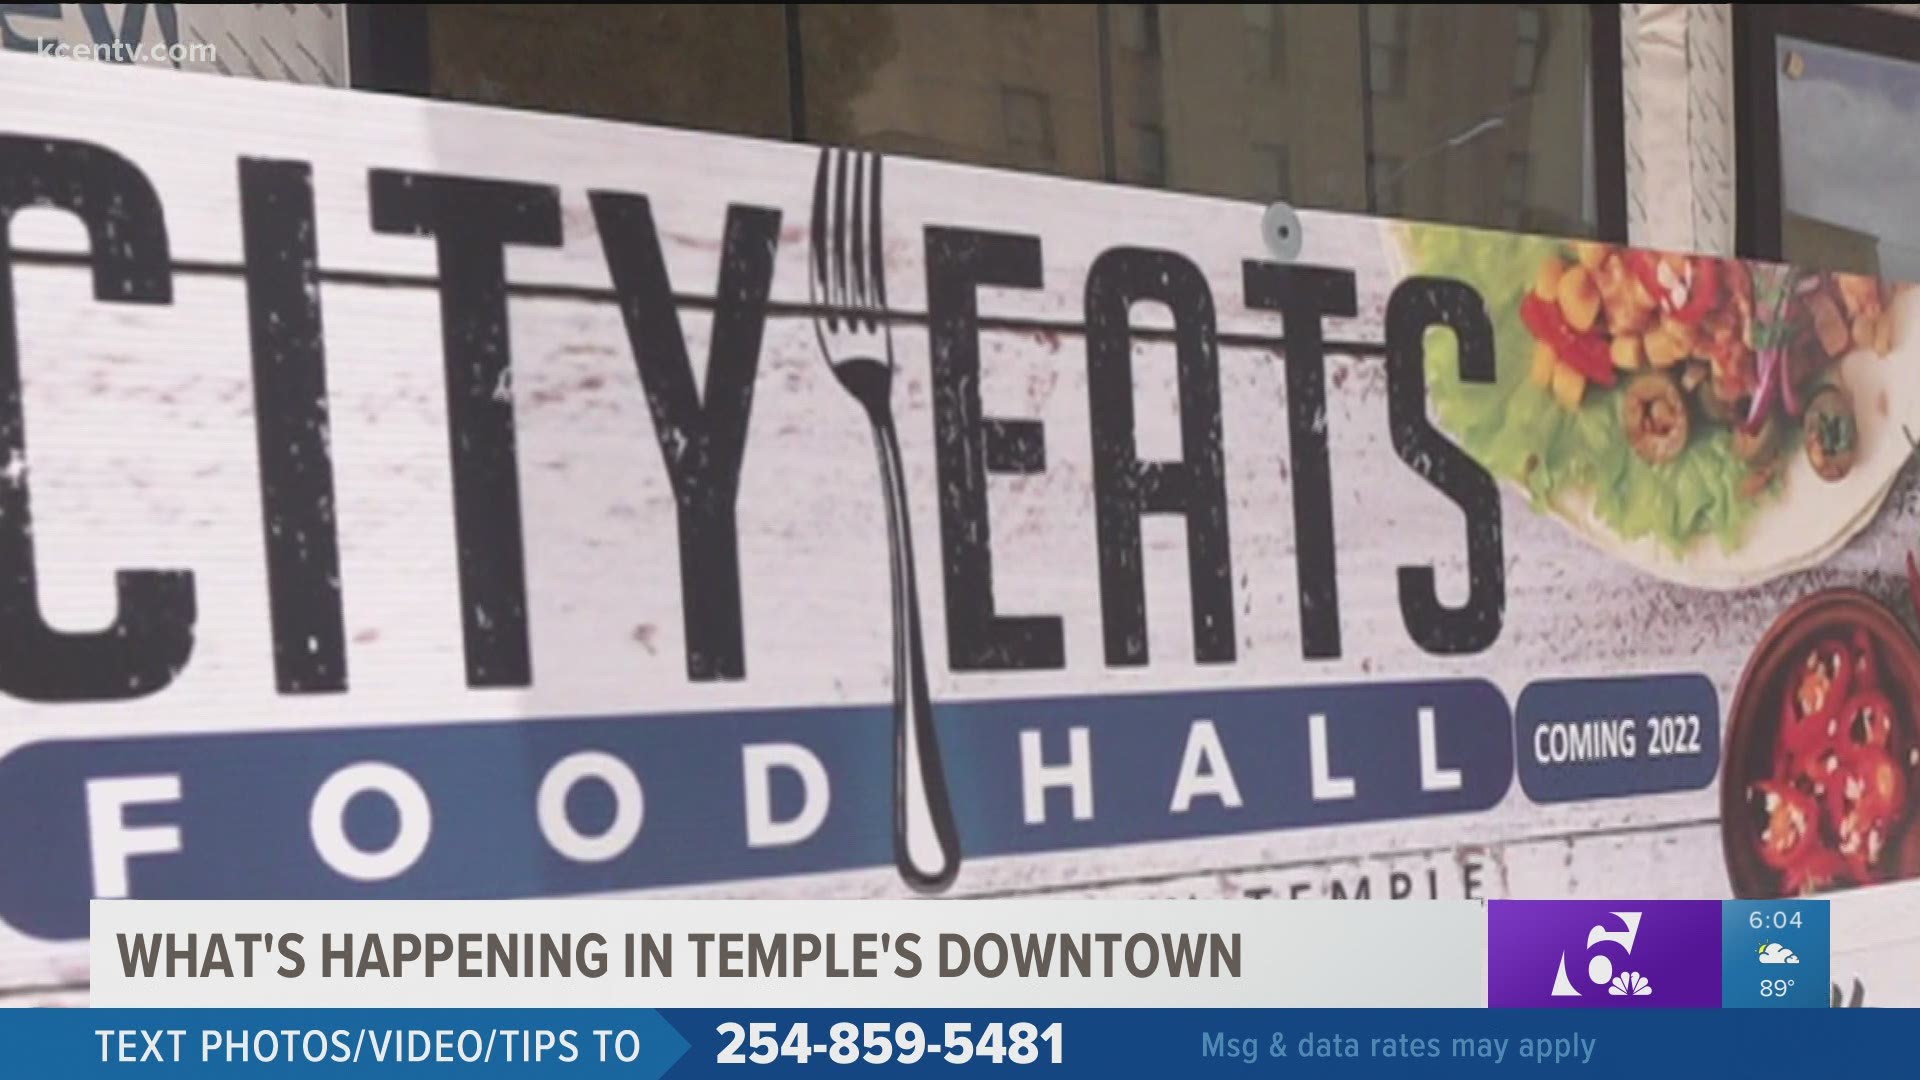 City of Temple spending $60 million for Downtown Temple. New restaurants and businesses are the way for Downtown Temple. Here's what's in store.